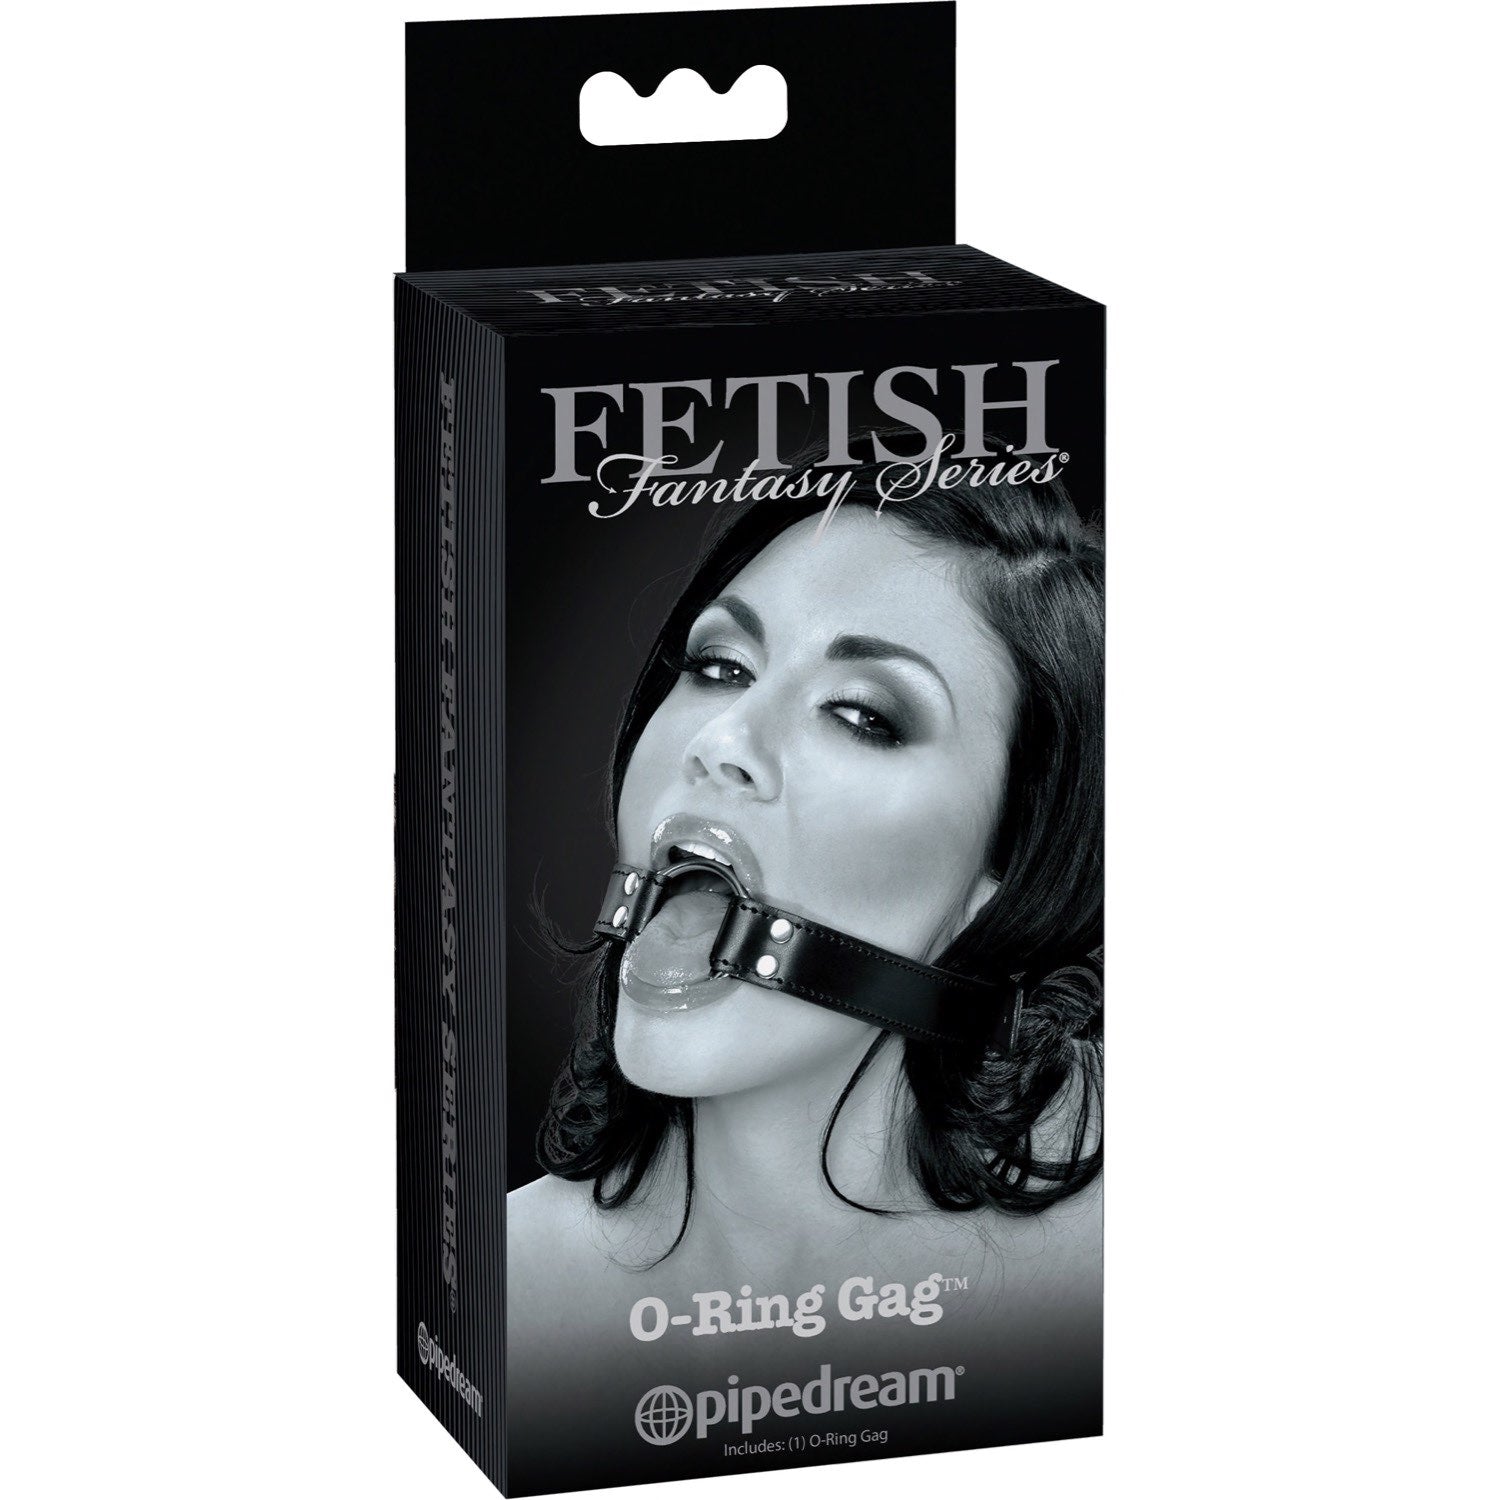 Fetish Fantasy Series Limited Edition O-ring Gag - Black Mouth Restraint by Pipedream